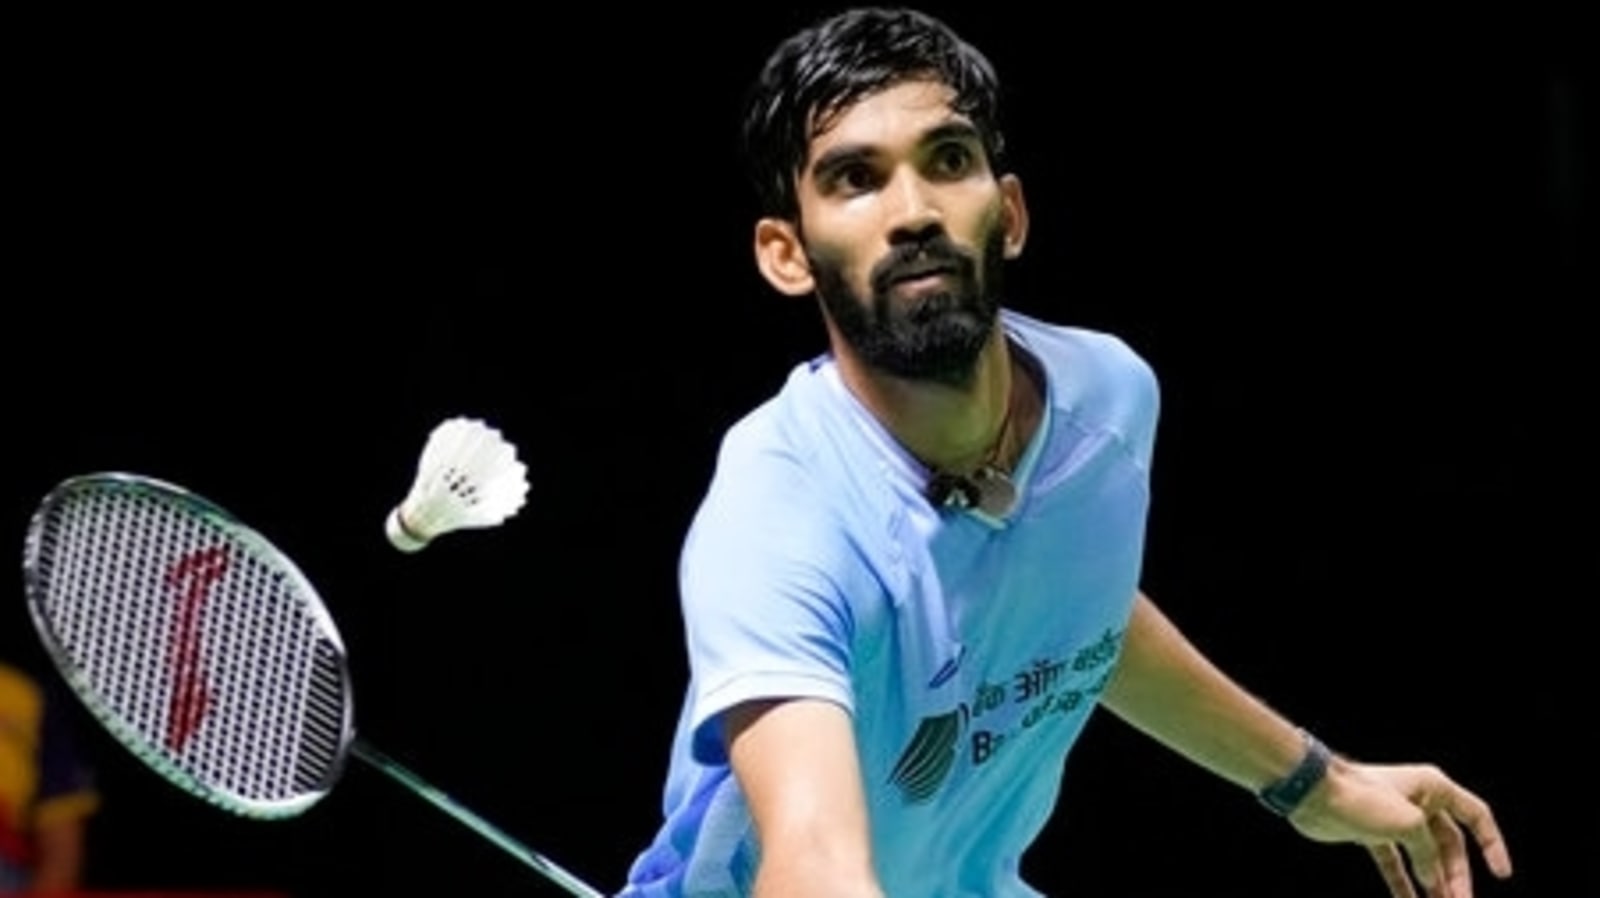 To win tournaments, you've to be better than everybody else: Kidambi Srikanth - Hindustan Times